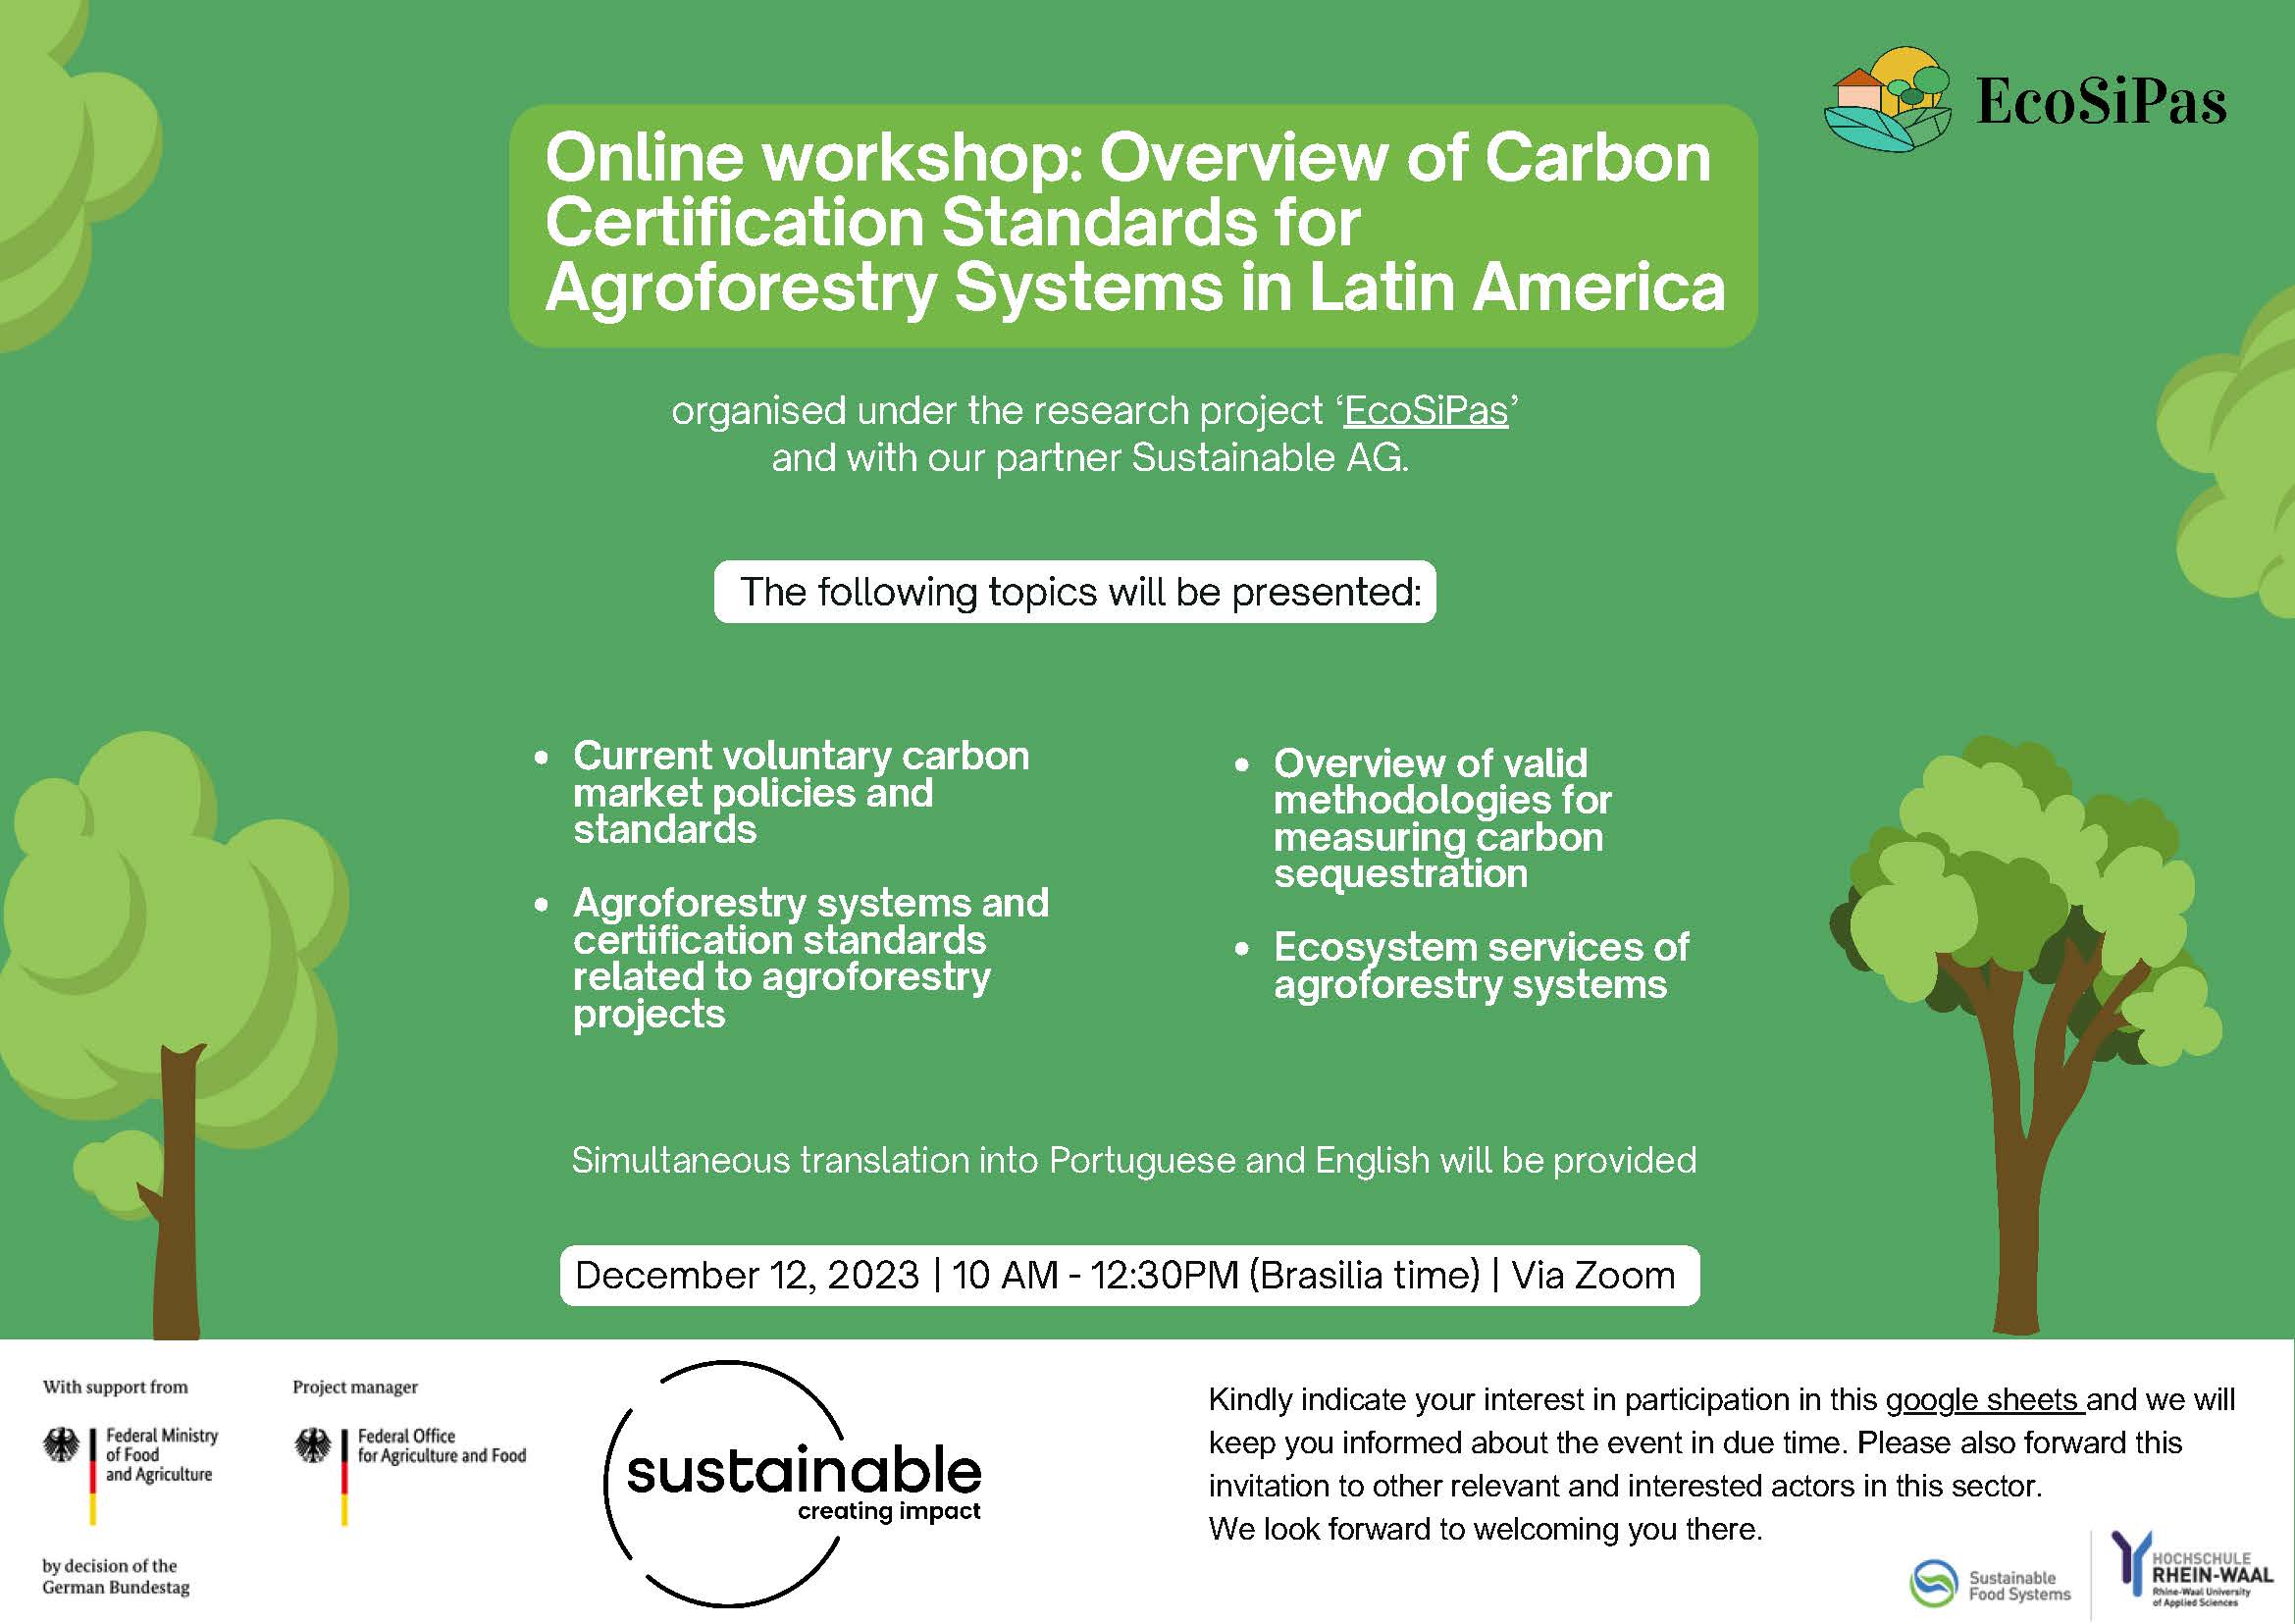 Successful Webinar on Carbon Certification Standards for Agroforestry Systems in Latin America